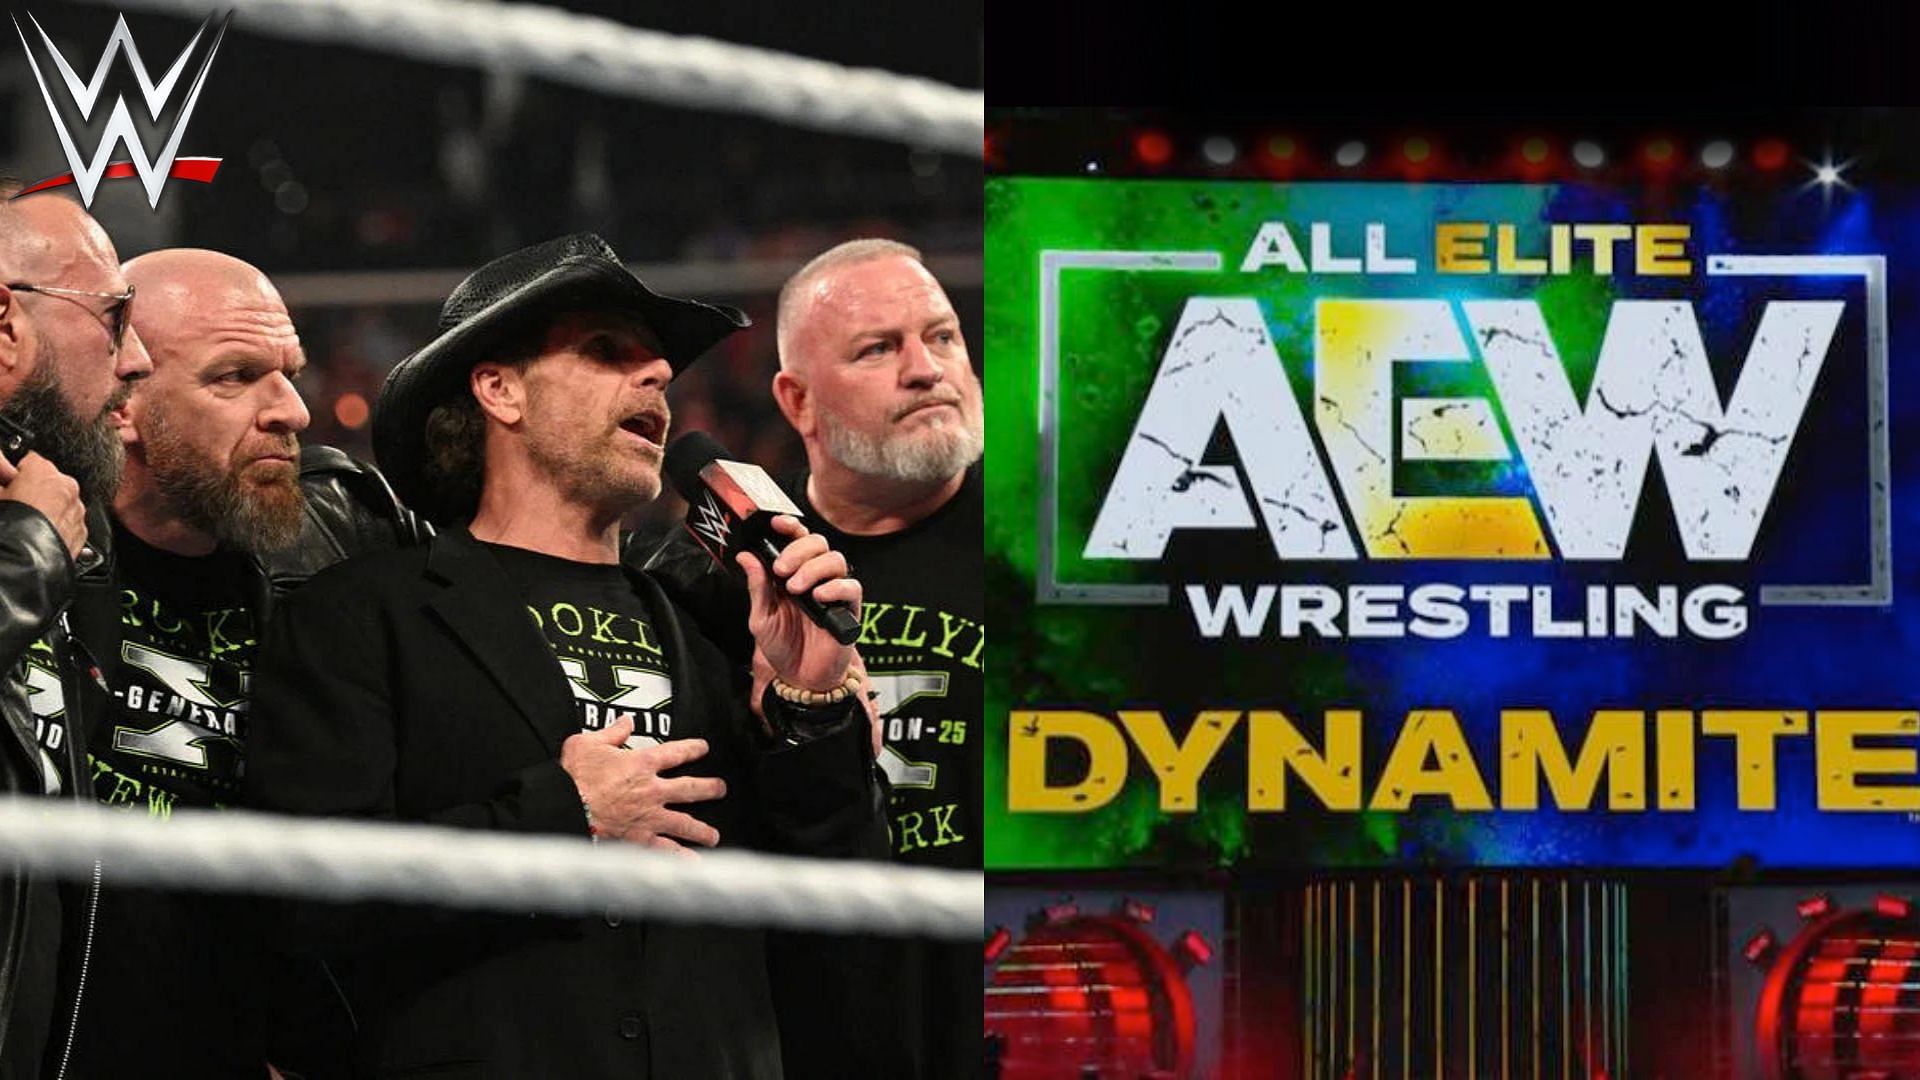 DX Generation was slyly referenced in AEW this week!